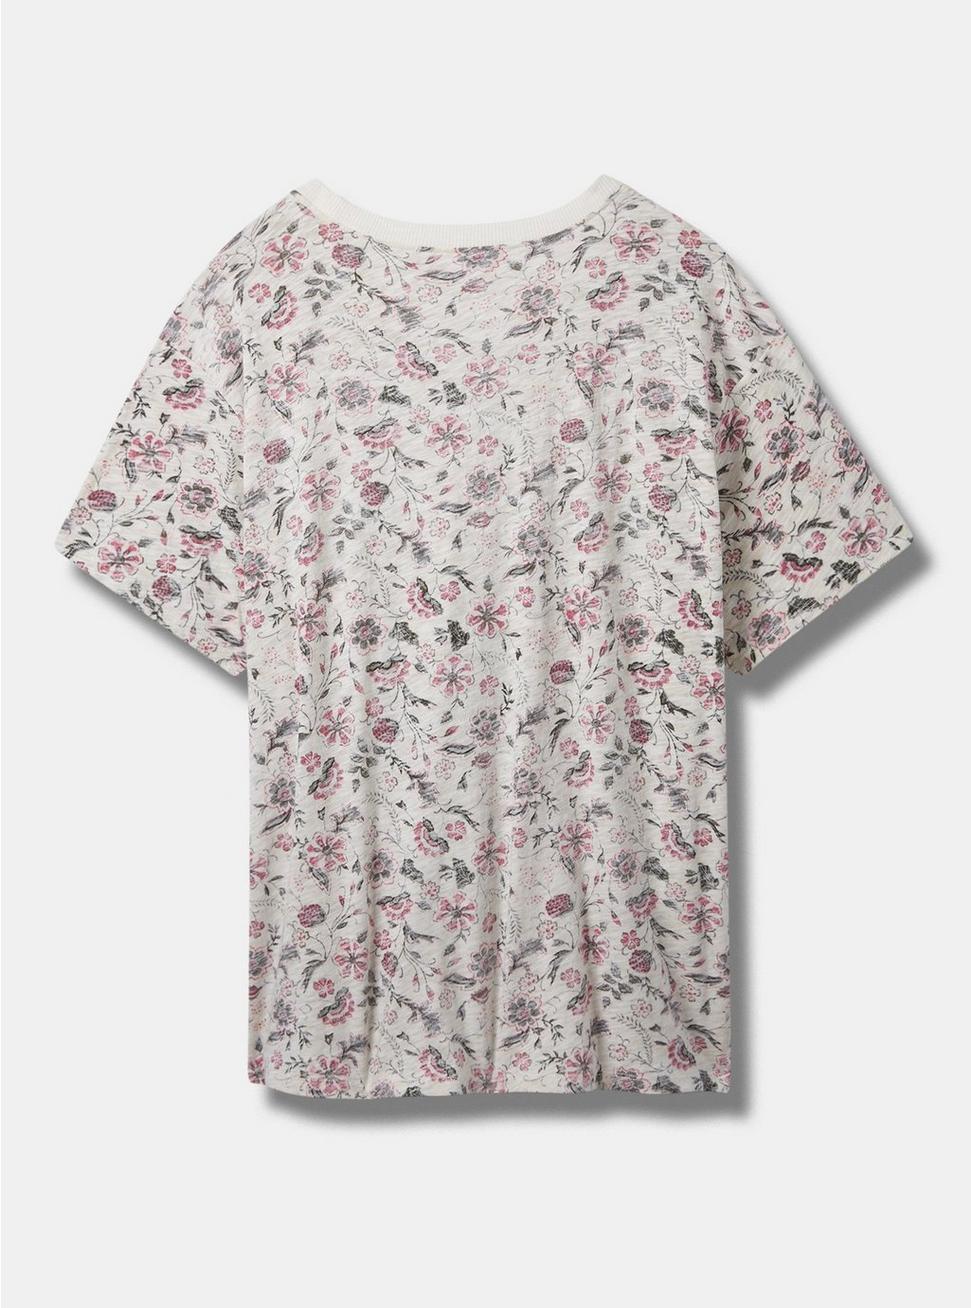 Enjoy The Little Things Relaxed Fit Cotton Crew Neck Tee, MULTI FLORAL, alternate